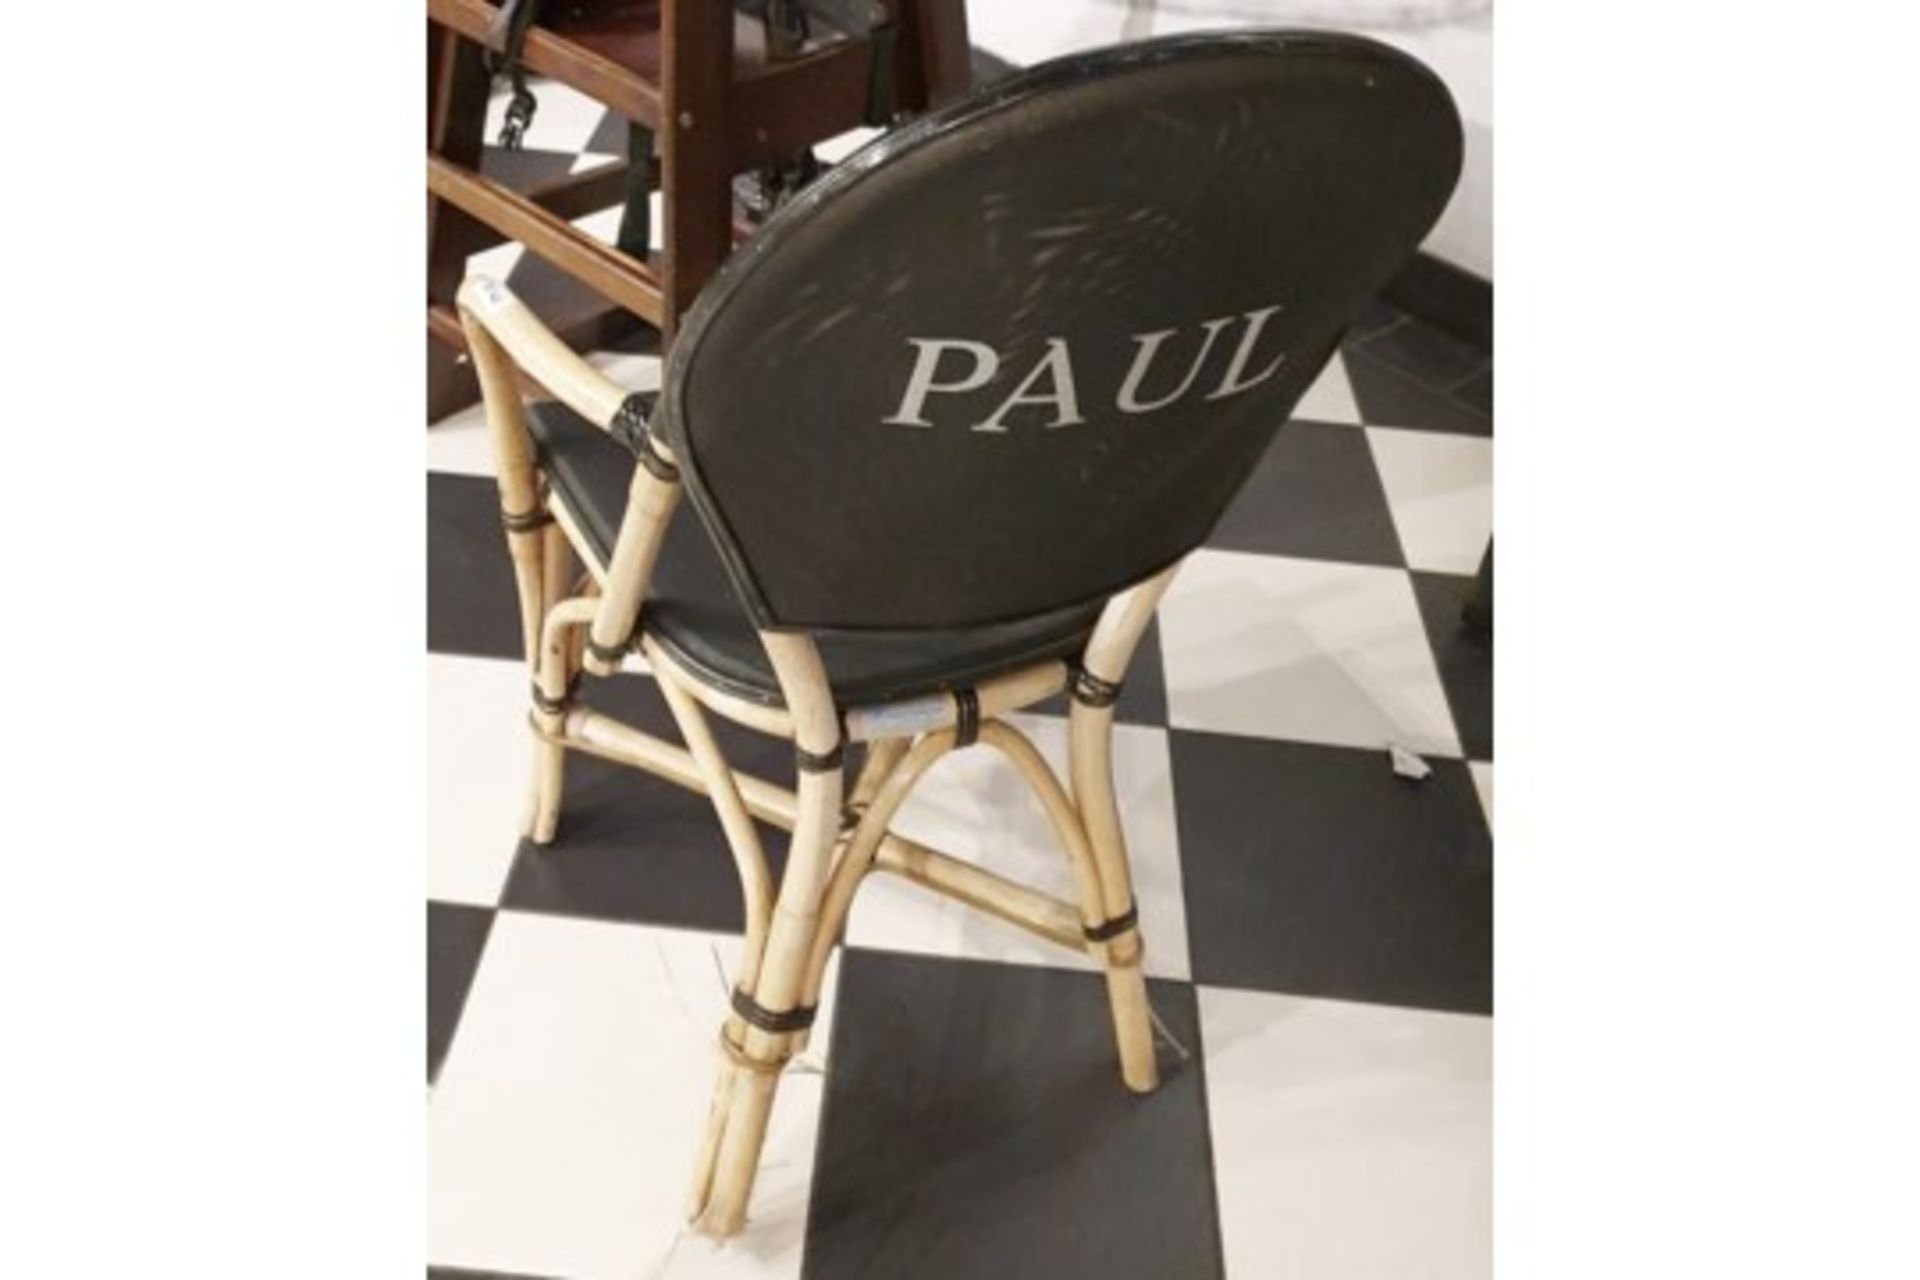 6 x Bamboo Studio Chairs With Black Seat and Back Rest - Features the Name 'PAUL' Printed on the - Image 2 of 5